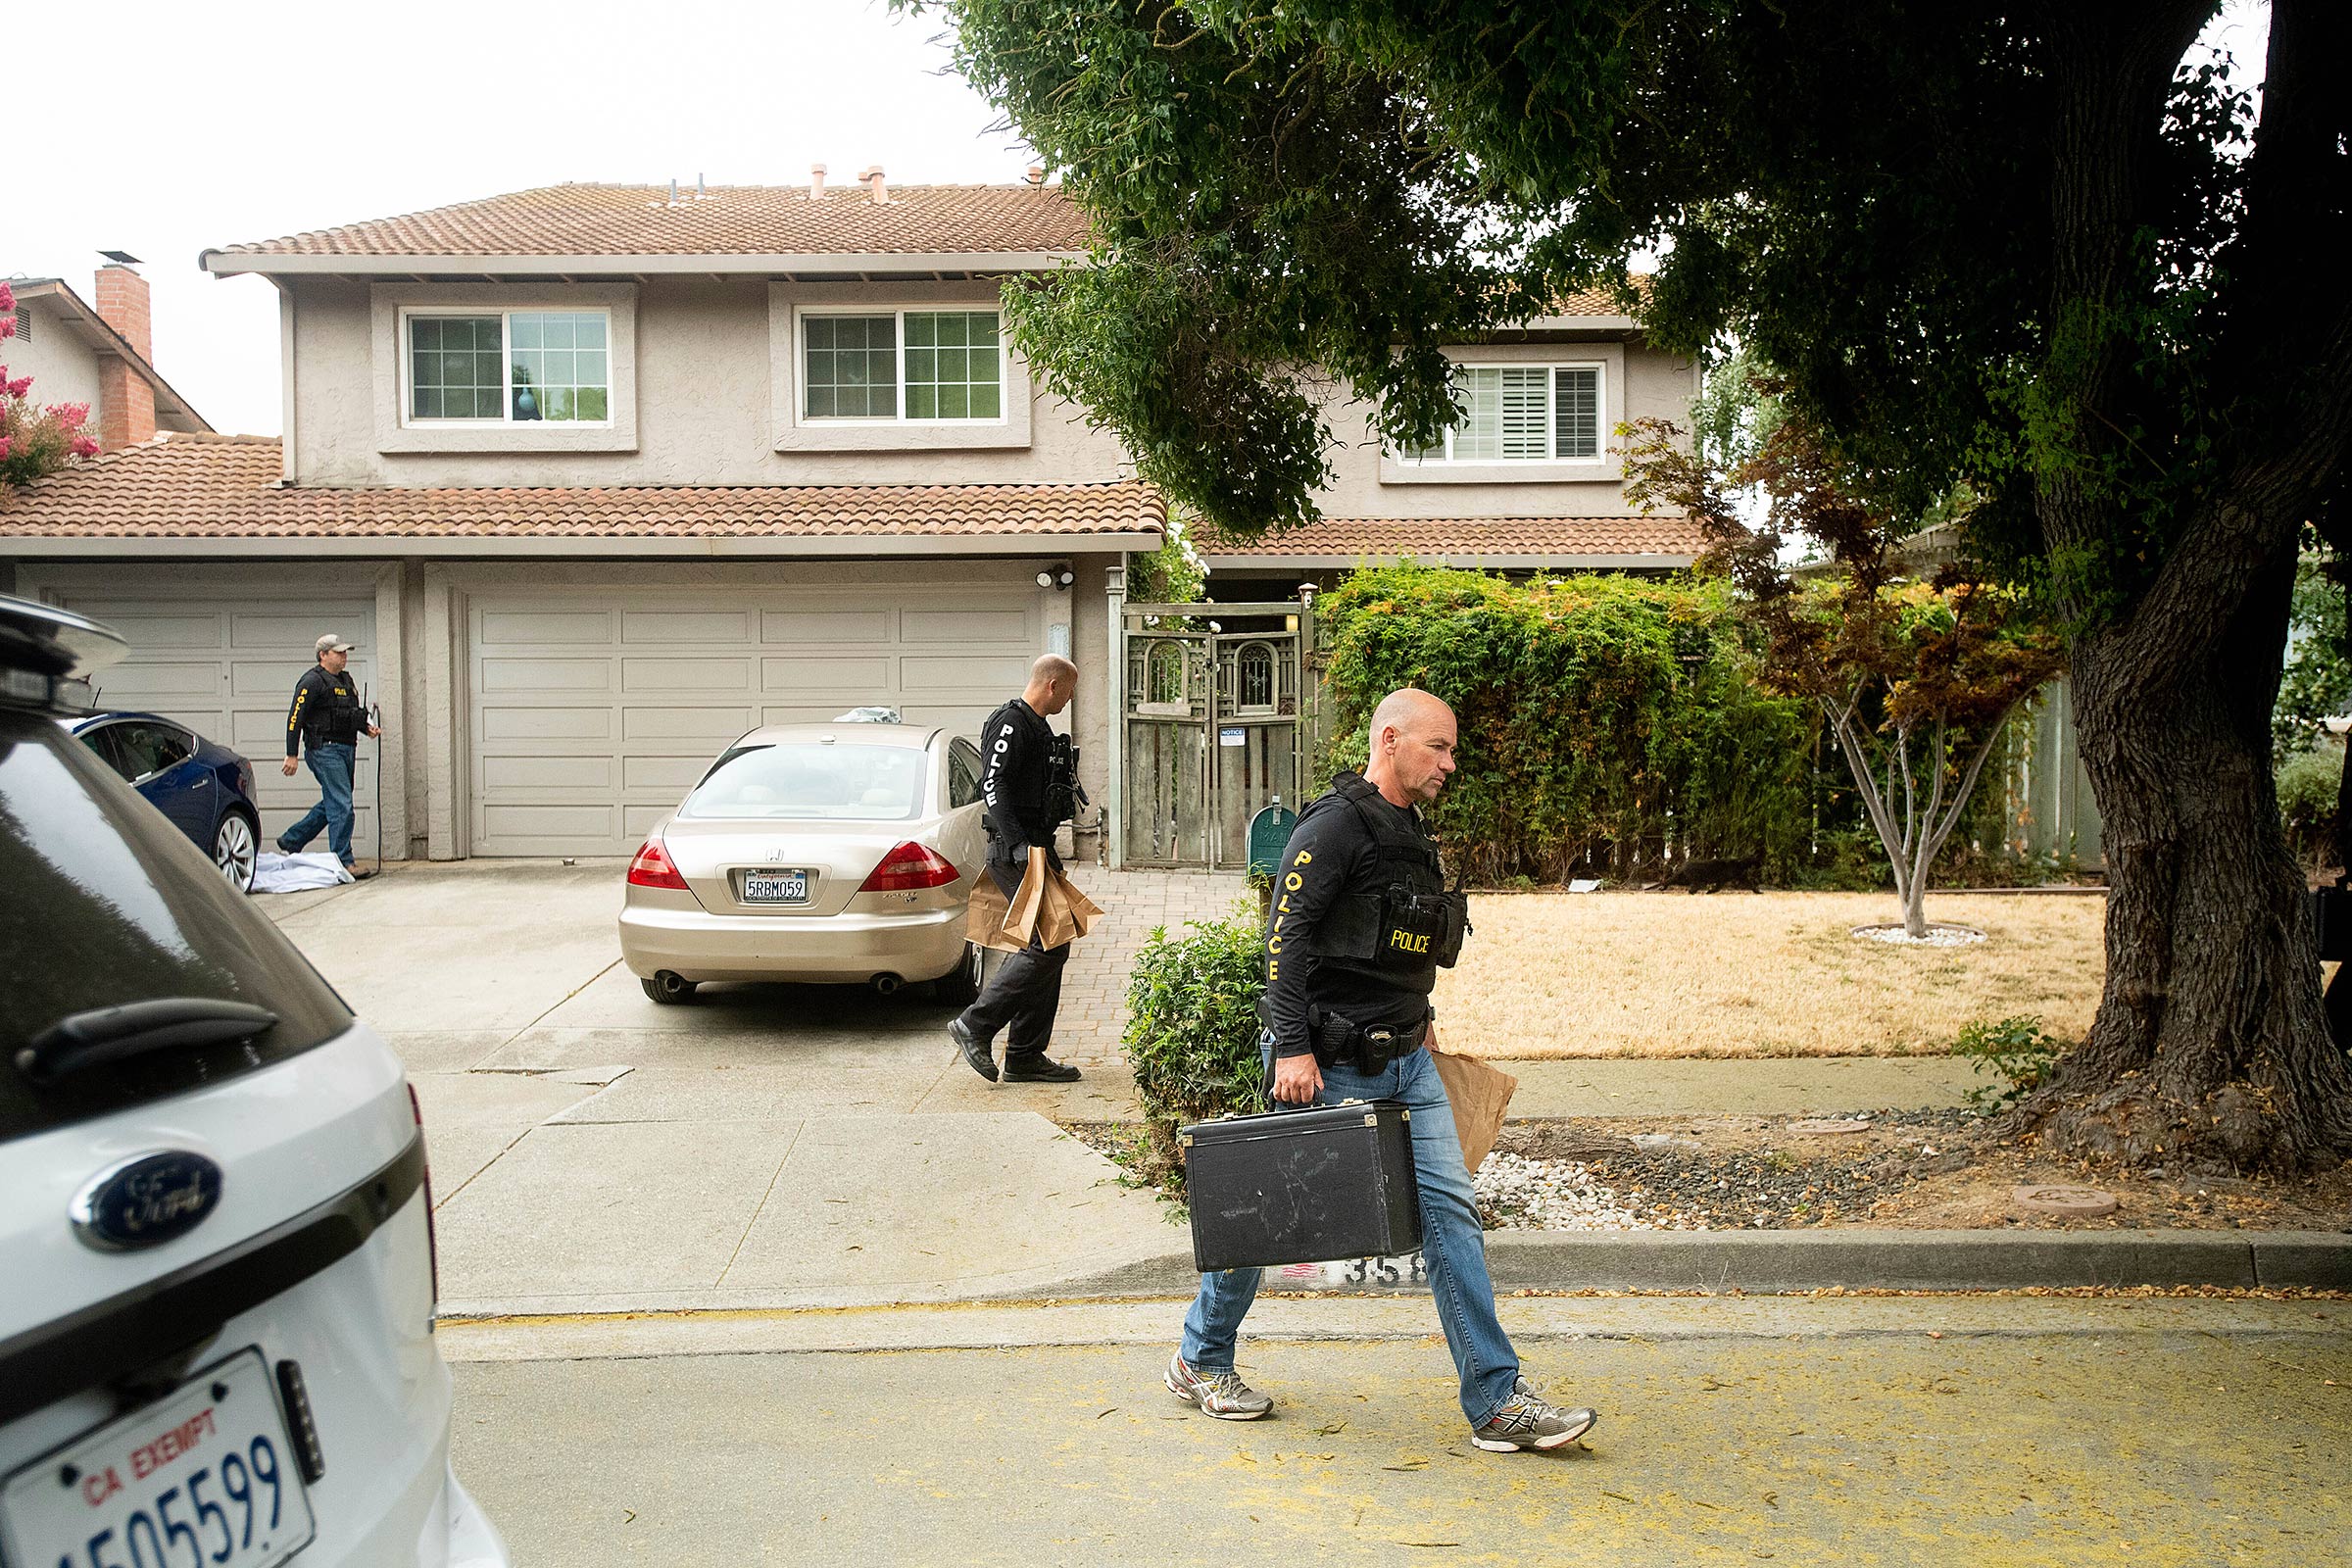 Police carry evidence bags from the home of the Gilroy shooting suspect.